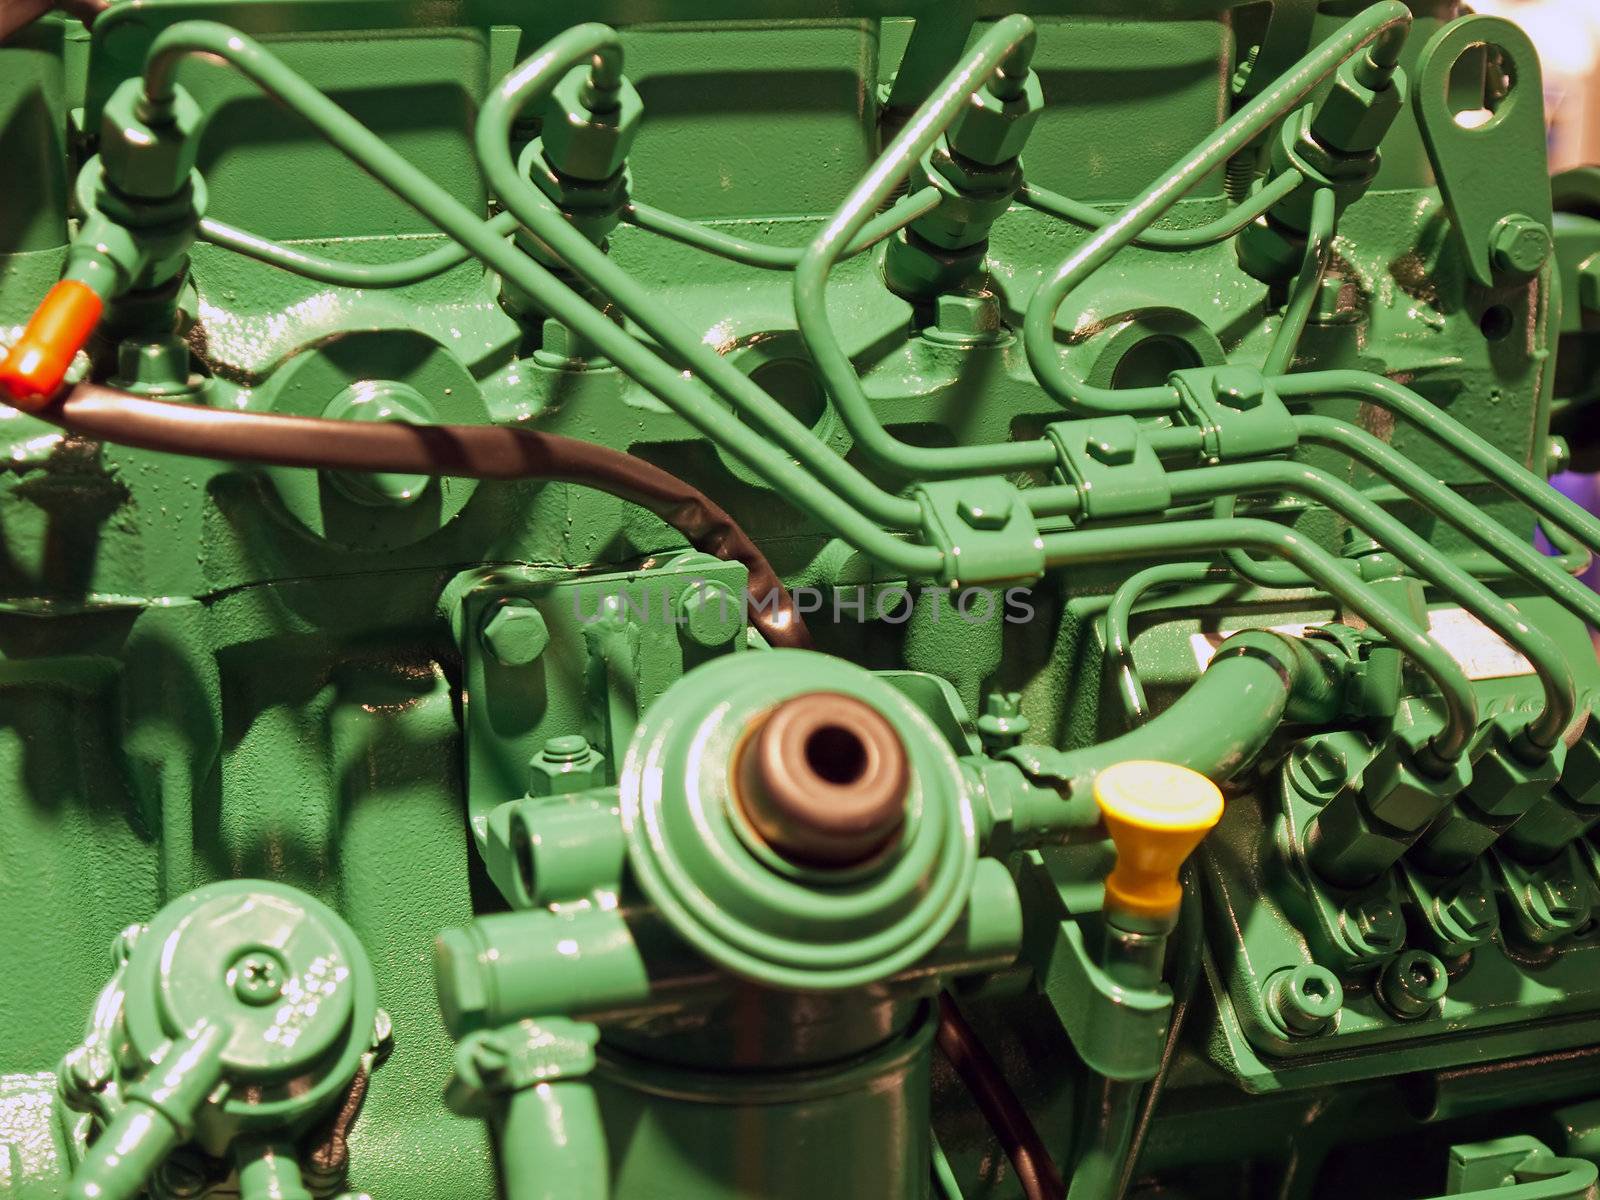 Details of a diesel engine motor in close up